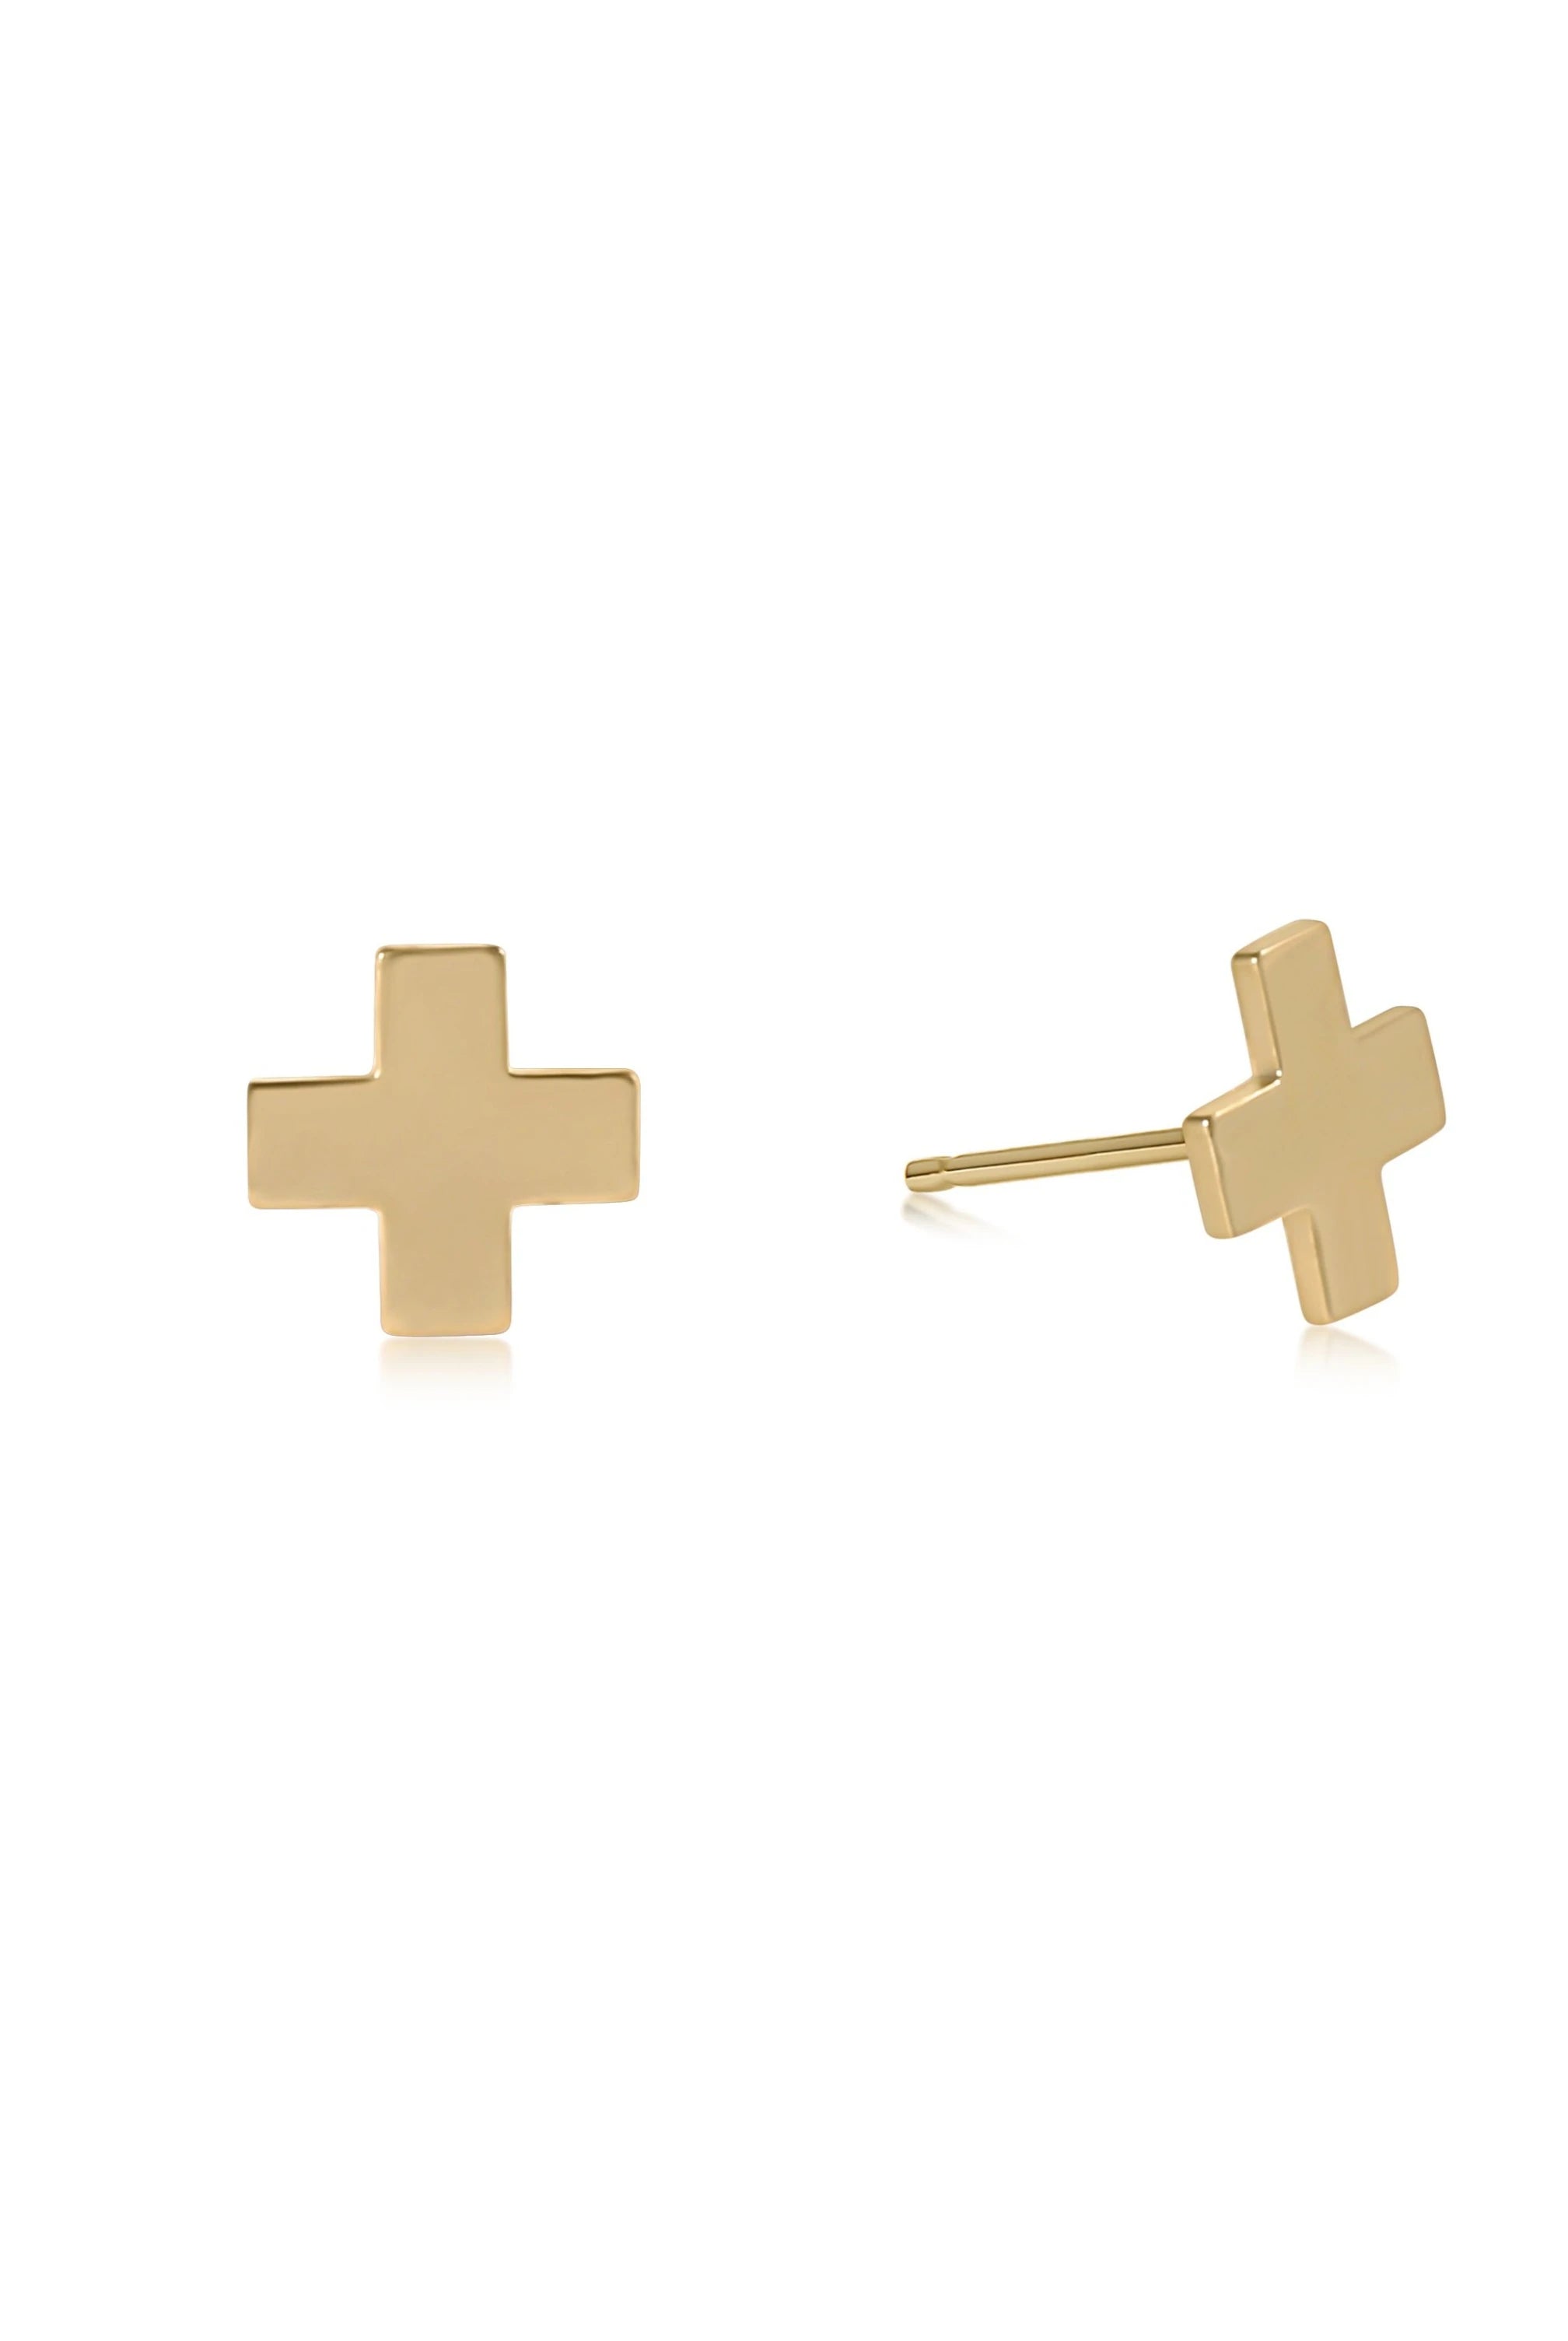 Signature Cross Gold Stud-Earrings-eNewton-The Lovely Closet, Women's Fashion Boutique in Alexandria, KY